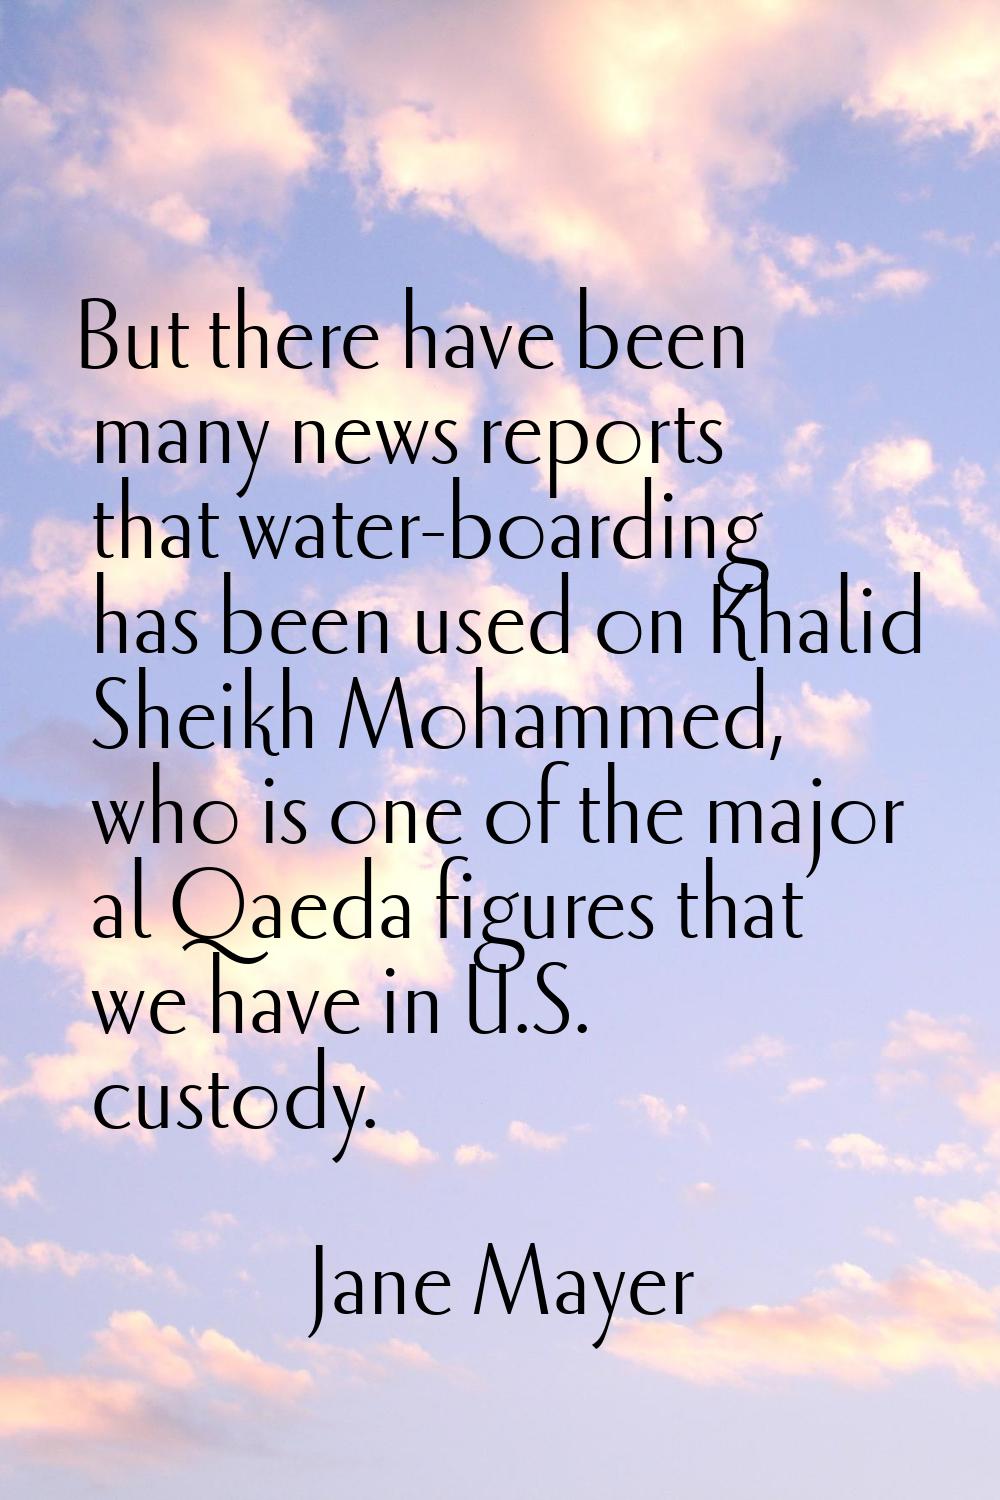 But there have been many news reports that water-boarding has been used on Khalid Sheikh Mohammed, 